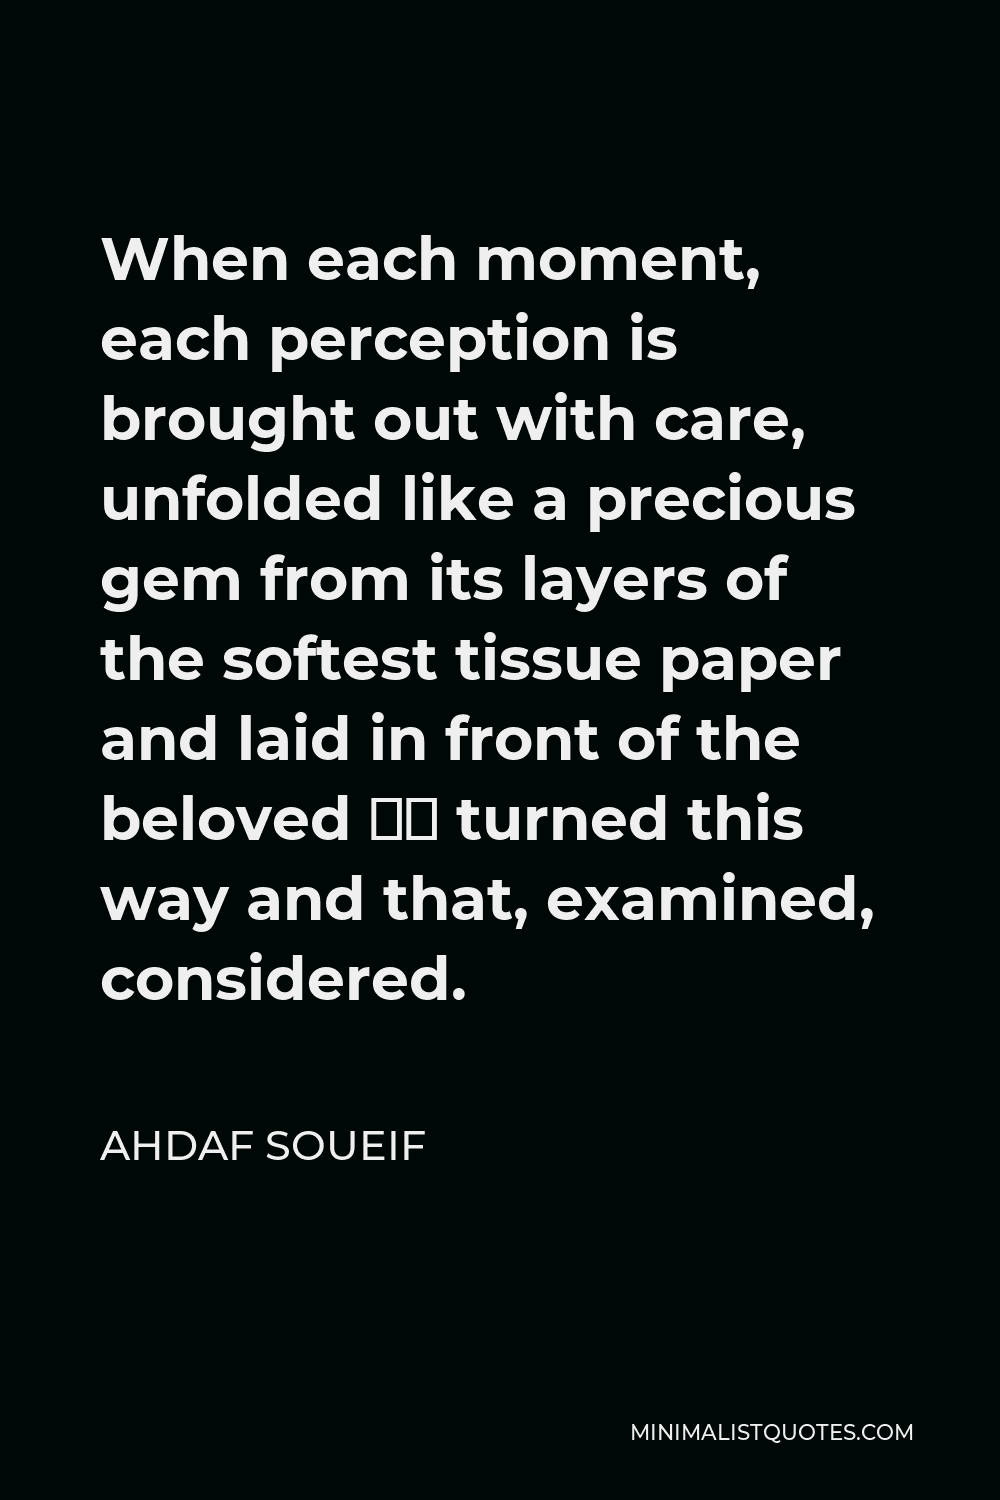 Ahdaf Soueif Quote - When each moment, each perception is brought out with care, unfolded like a precious gem from its layers of the softest tissue paper and laid in front of the beloved — turned this way and that, examined, considered.